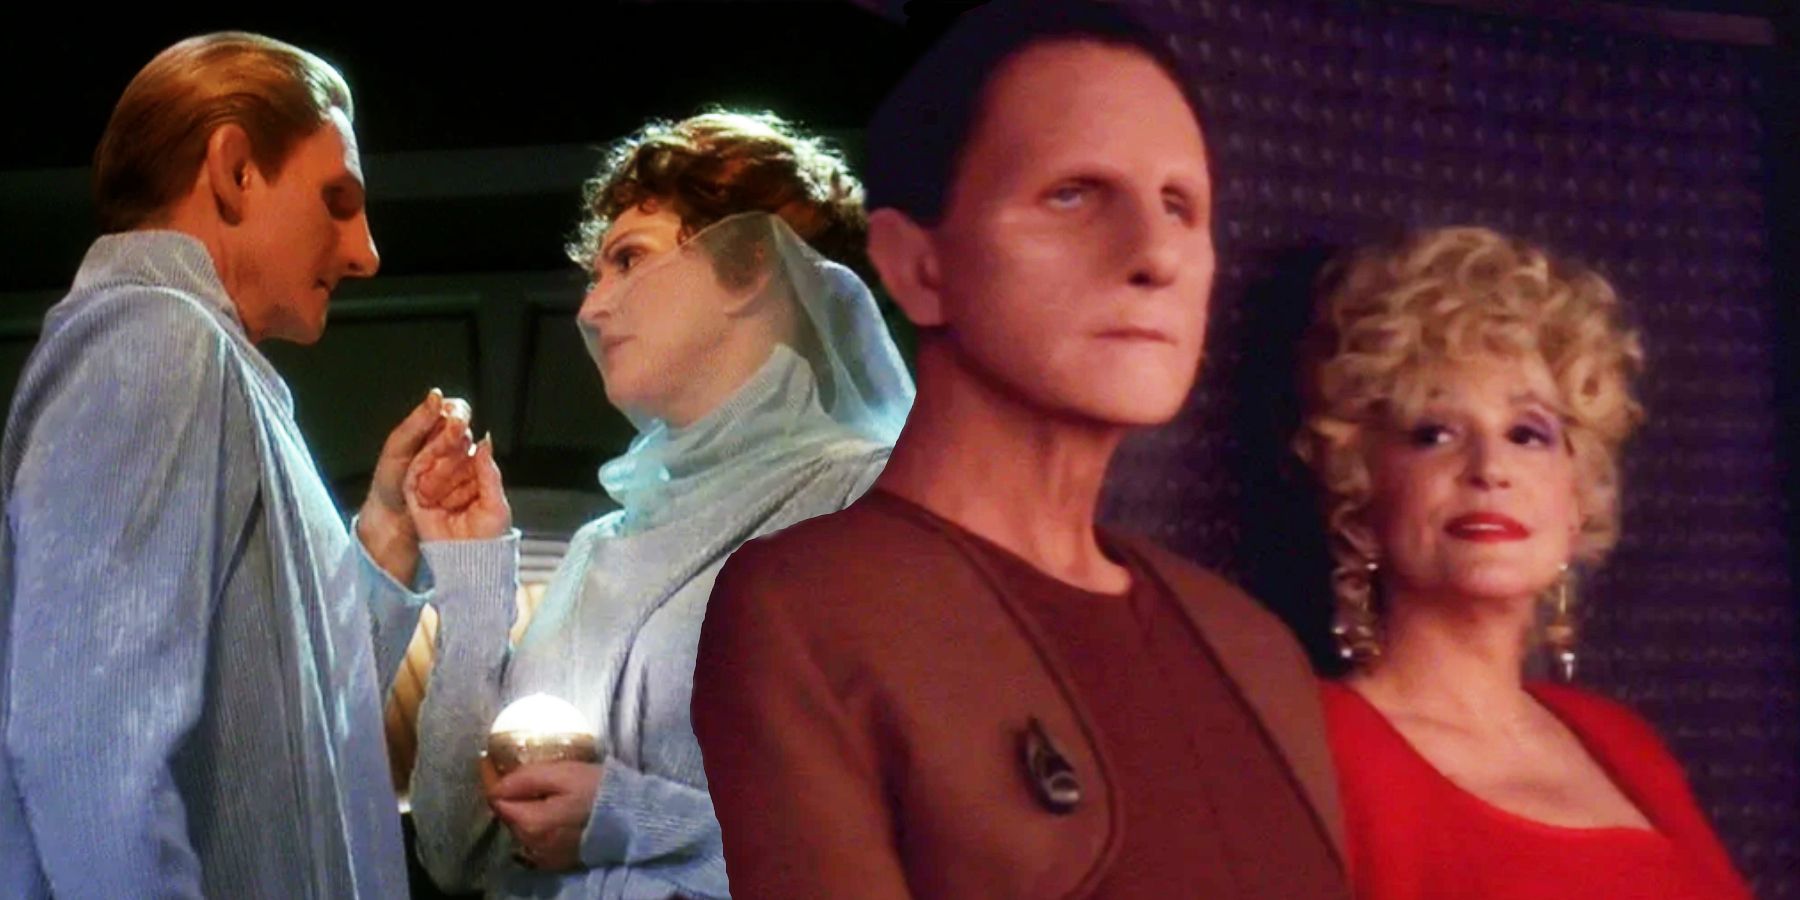 Odo and Lwaxana get married in DS9 Season 4 and Odo and Lwaxana get trapped in a turbolift in DS9 Season 1